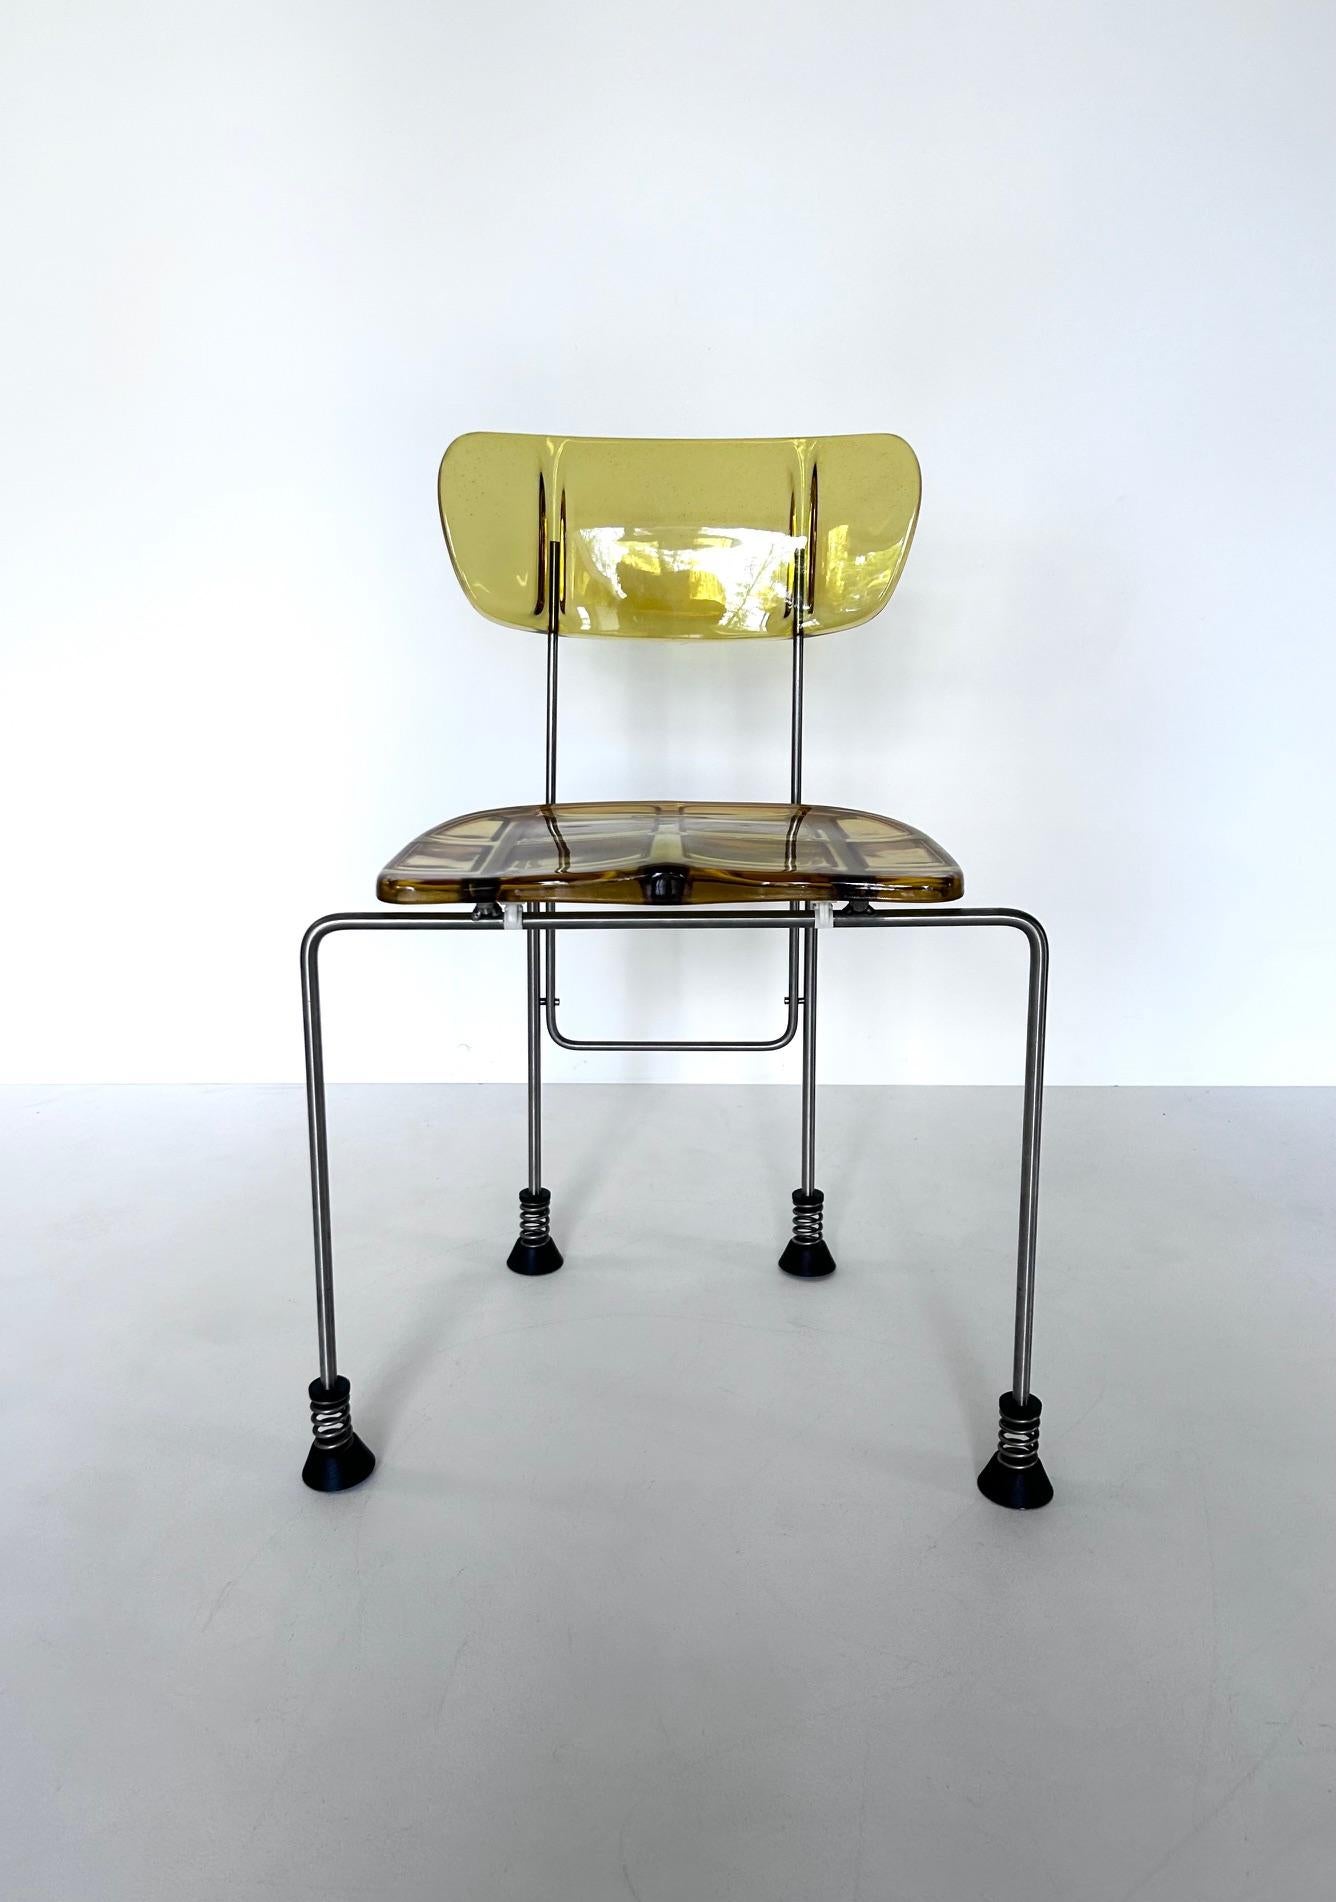 Rare set of 6 Broadway chairs, Gaetano Pesce, Bernini, 1993

Gaetano Pesce ‘Broadway’ chairs produced by Bernini with four rubber-capped feet standing on springs. 
Model 543, created in 1993 for Bernini
Epoxy resin back and seat / Stainless steel